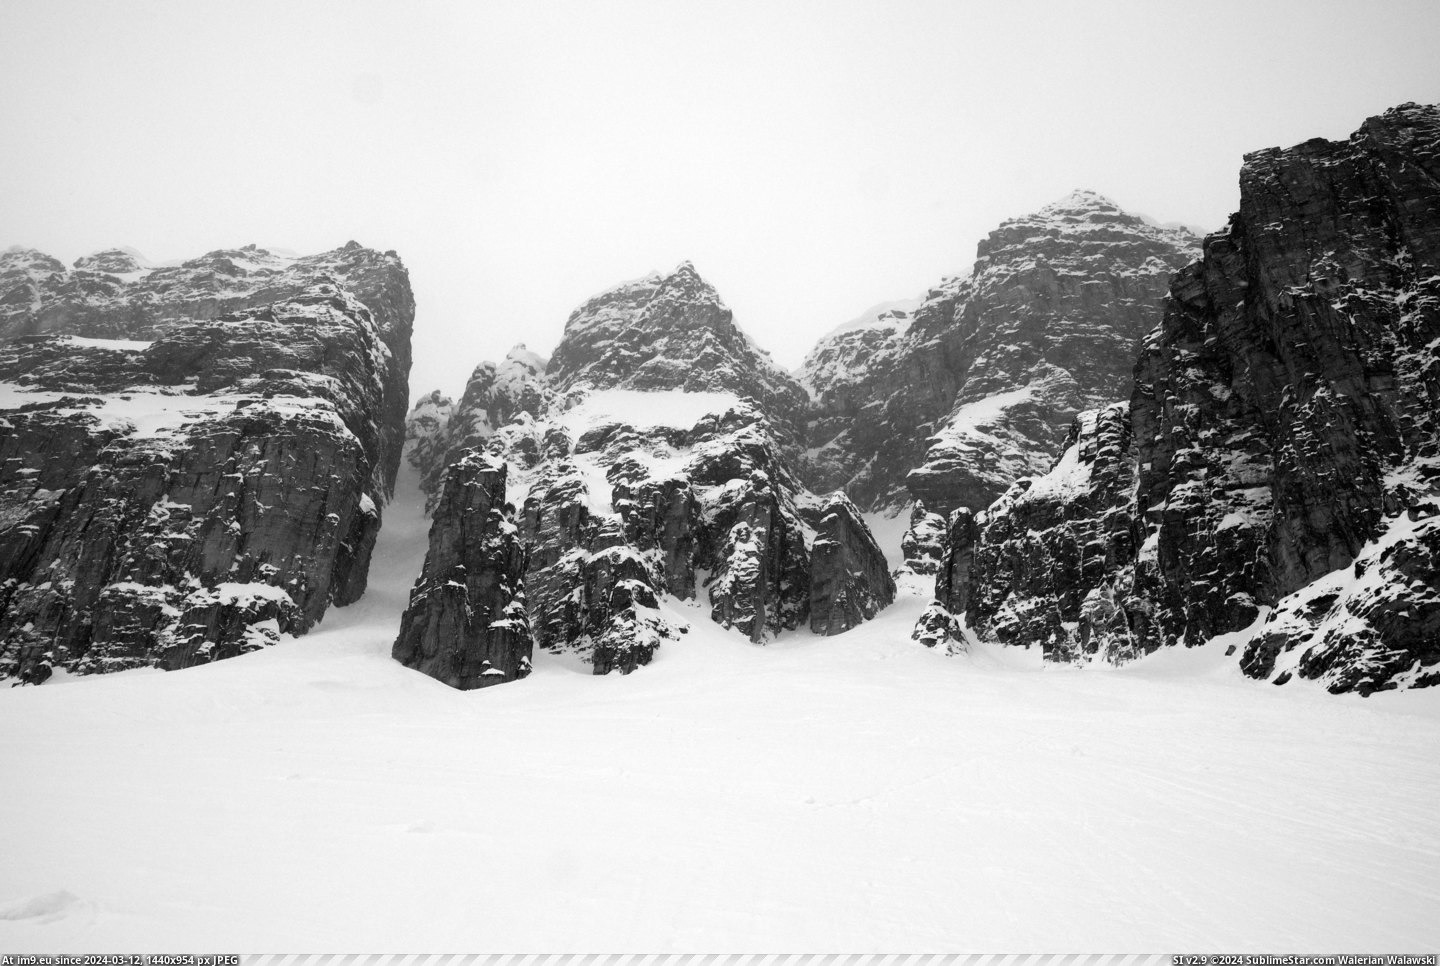 #Black #Photos #Daddy #Case #Rarely #White #Grand [Earthporn] I rarely see black and white photos here, but in this case I think it's appropriate. The Grand Daddy Couloir in Banf Pic. (Изображение из альбом My r/EARTHPORN favs))